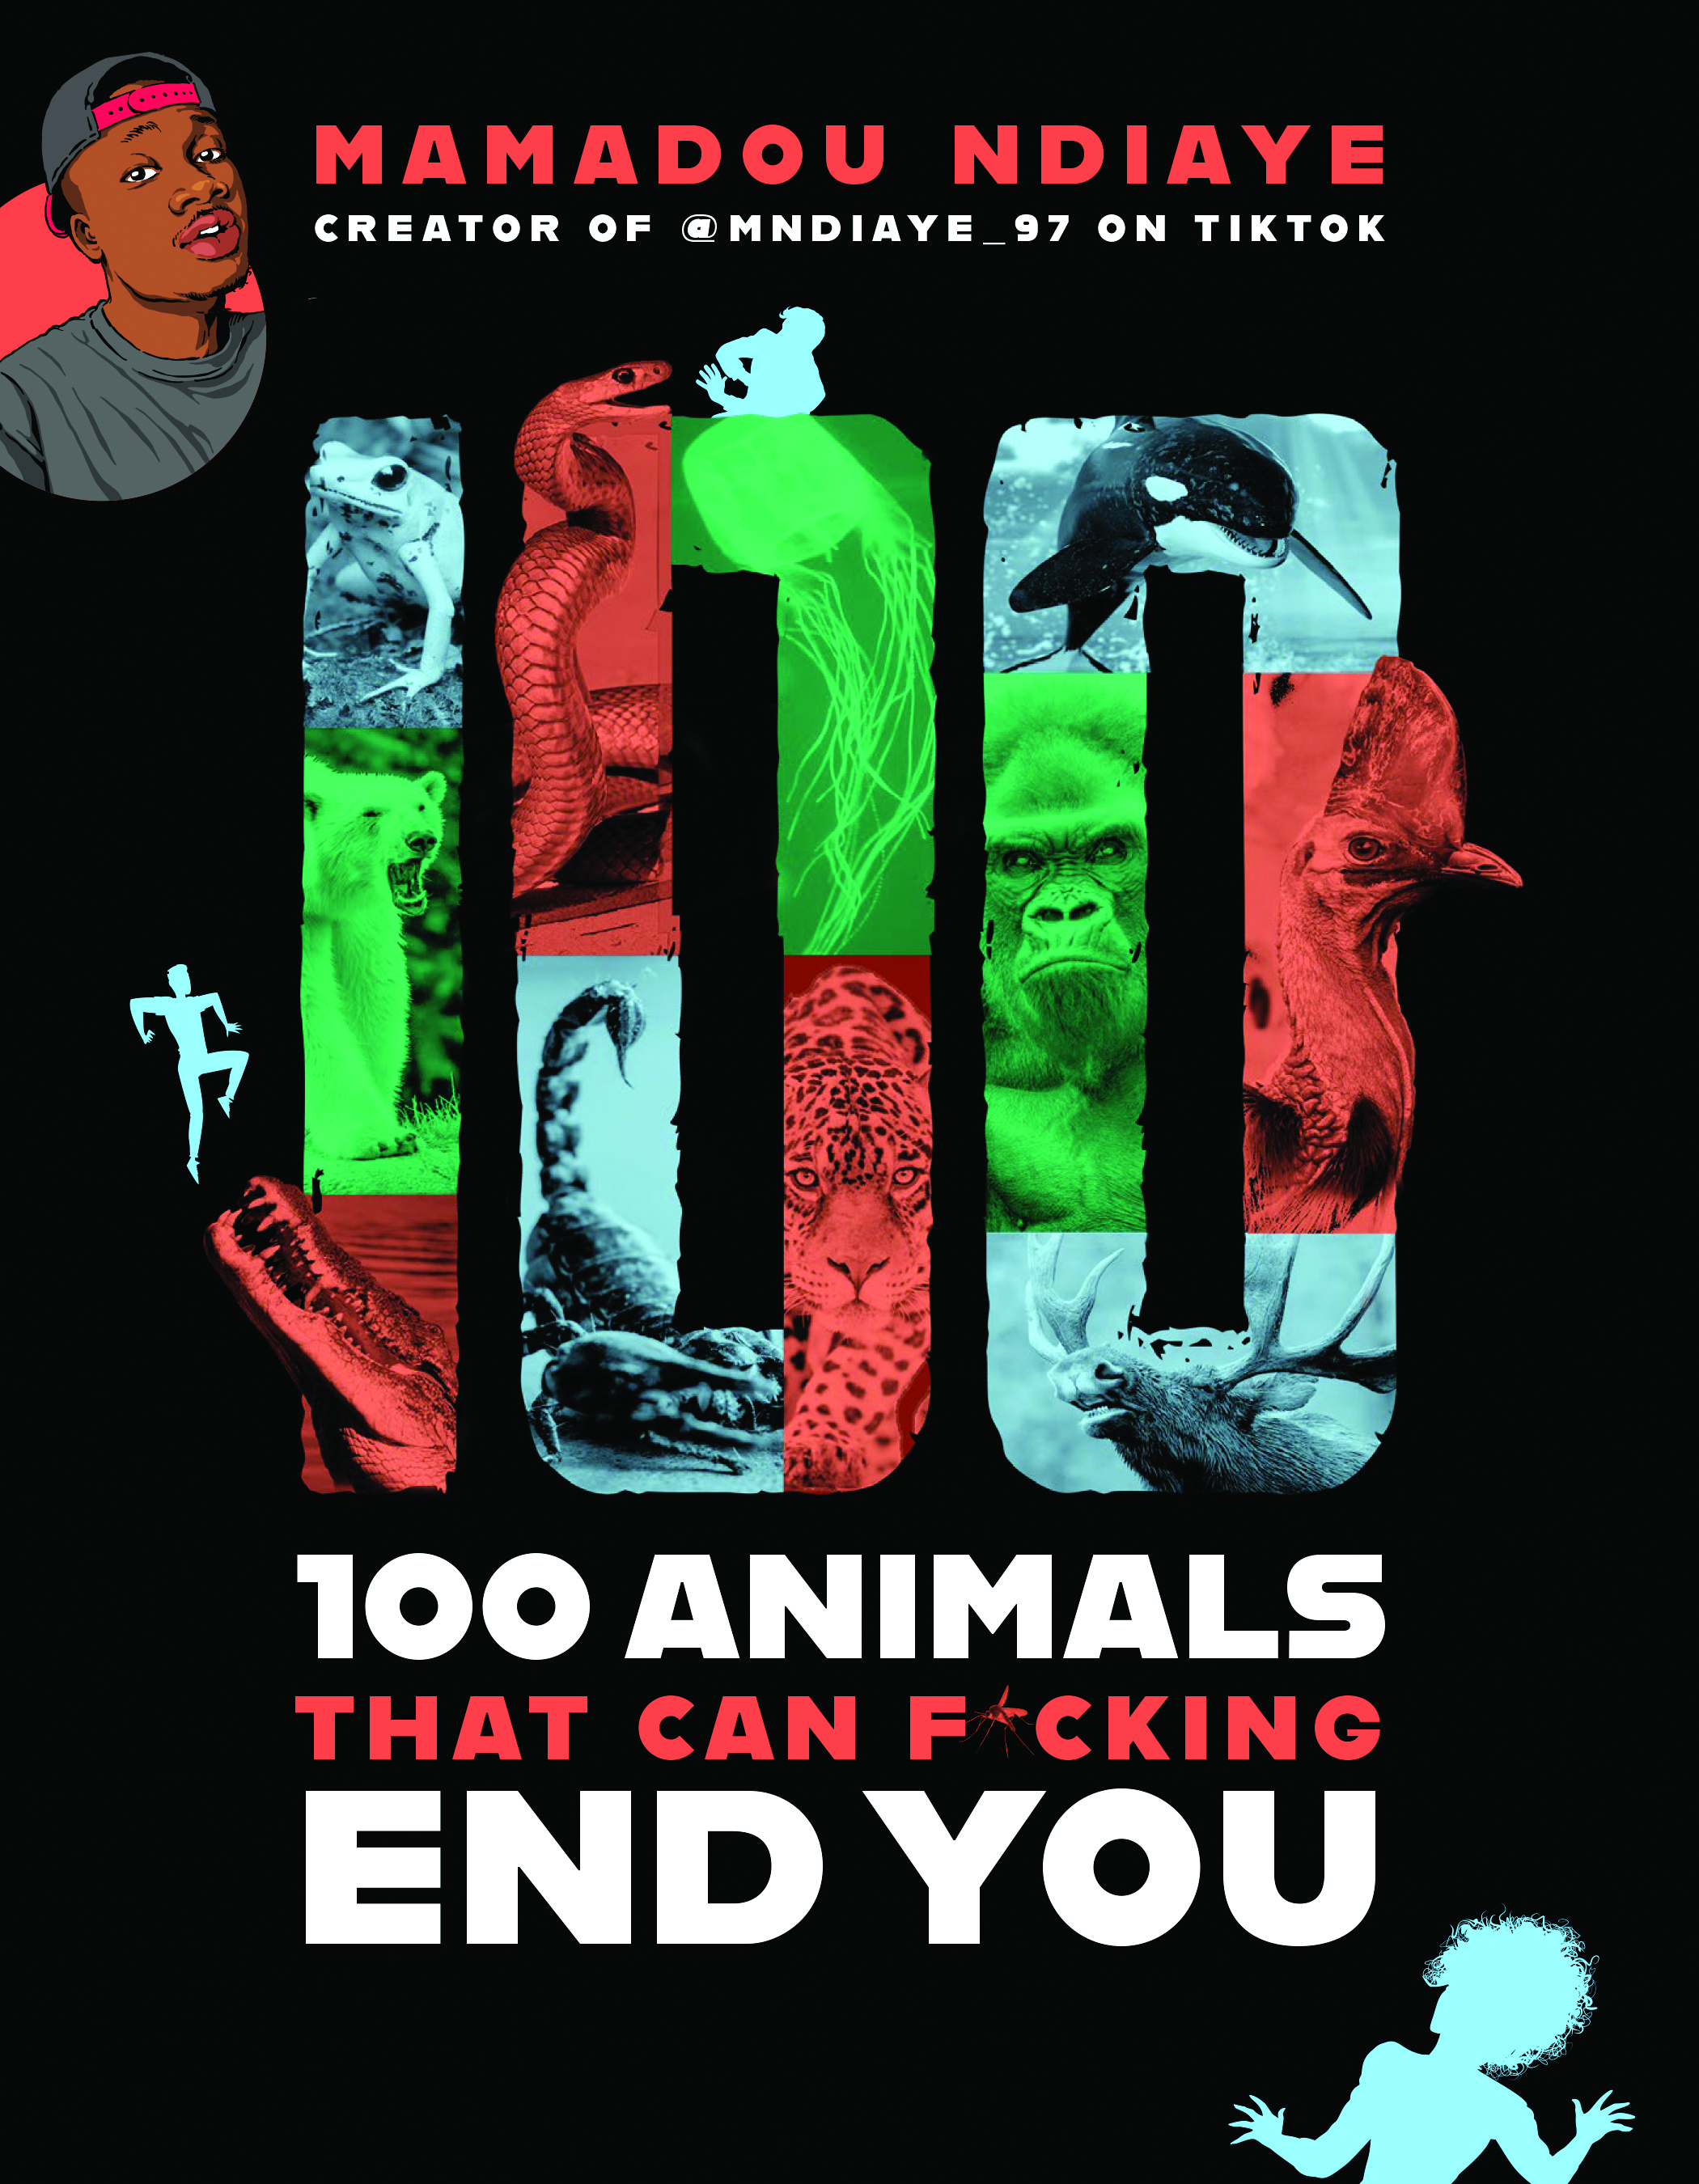 Can　Ndiaye　by　That　Group　100　Animals　You　Mamadou　F*cking　Book　End　Hachette